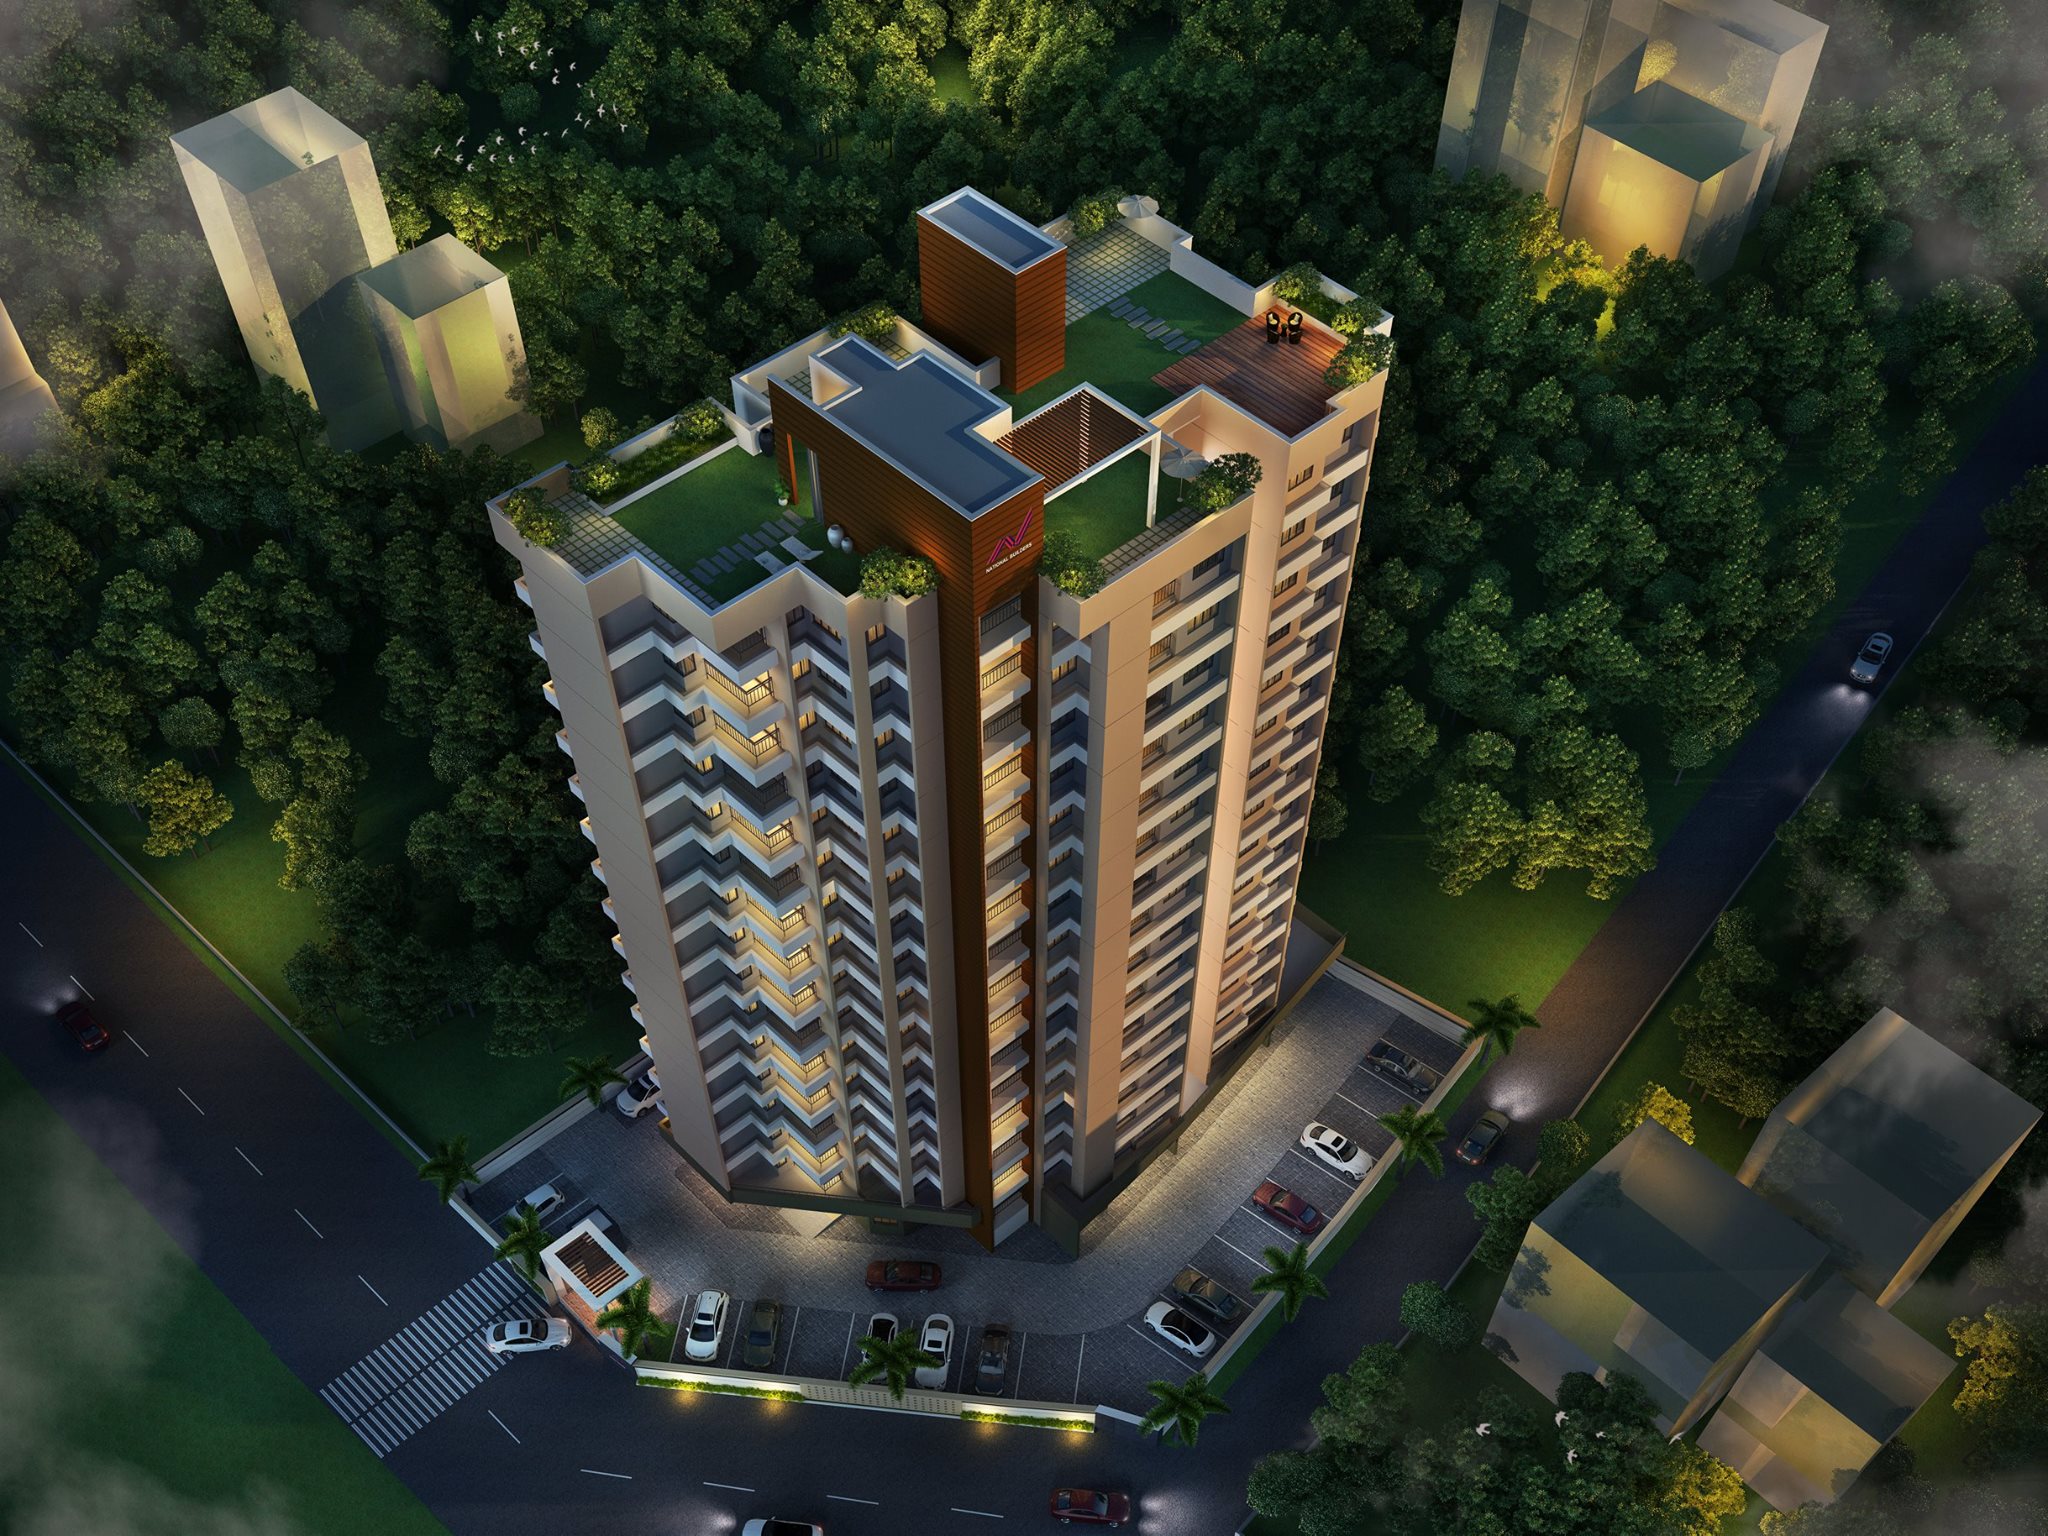 WHAT ARE THE POPULAR OPTIONS FOR APARTMENTS IN KOCHI AND WHAT ARE THE AMENITIES AND FEATURES NATIONAL SIGNATURE OFFER?